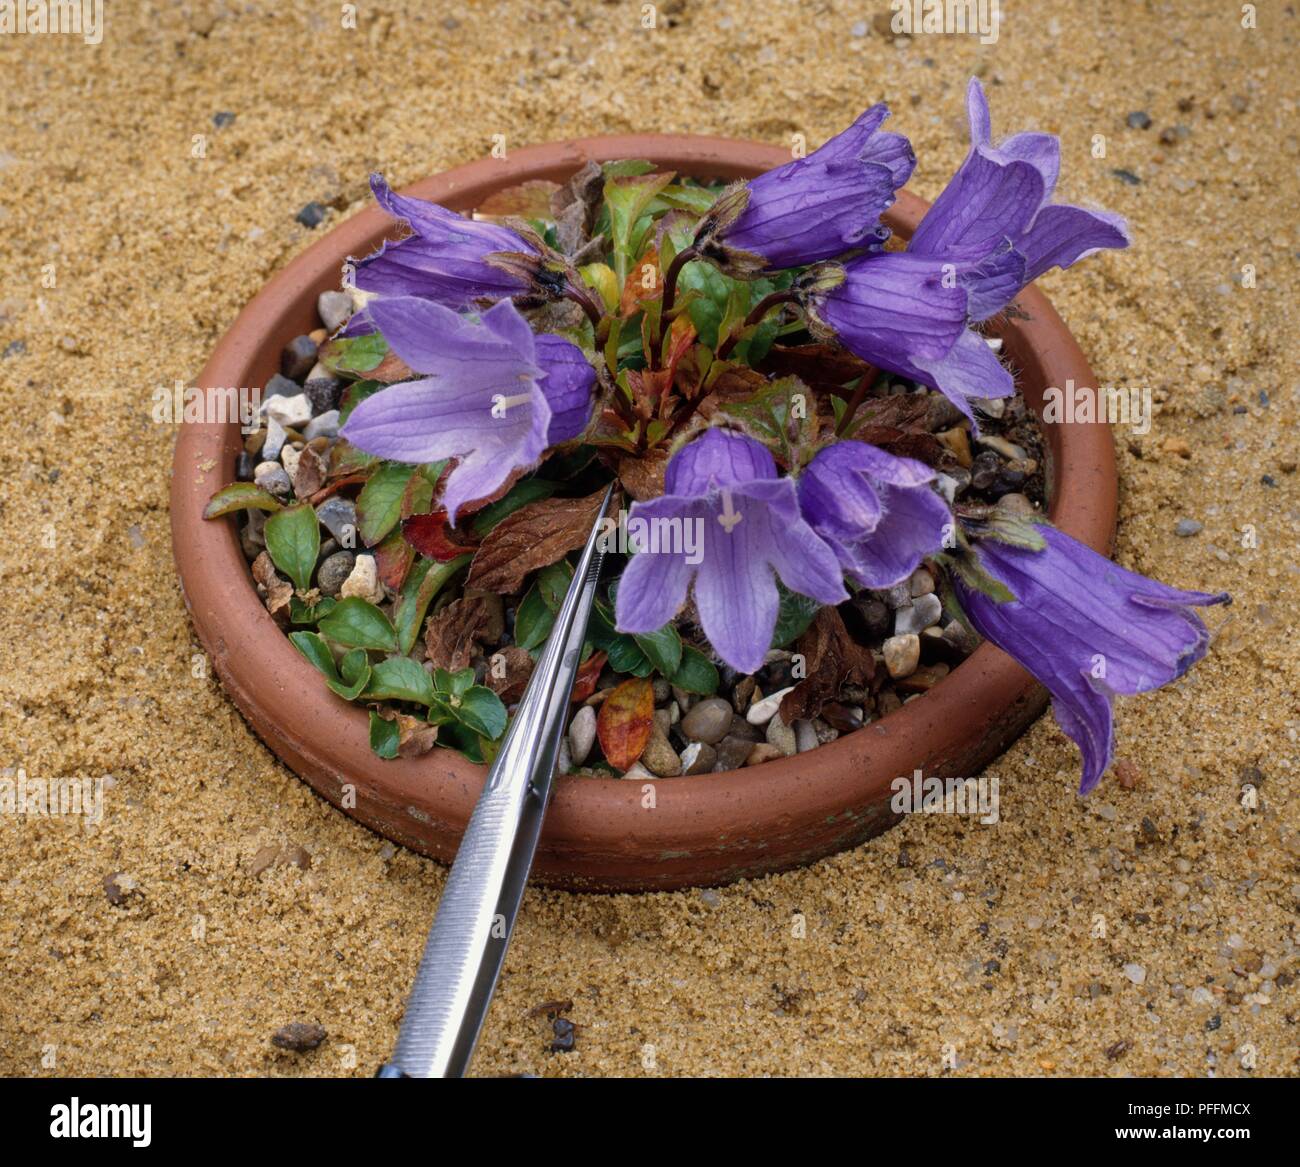 Using tweezers to remove withered leaves from Campanula pilosa plant, potted in a sand bed Stock Photo